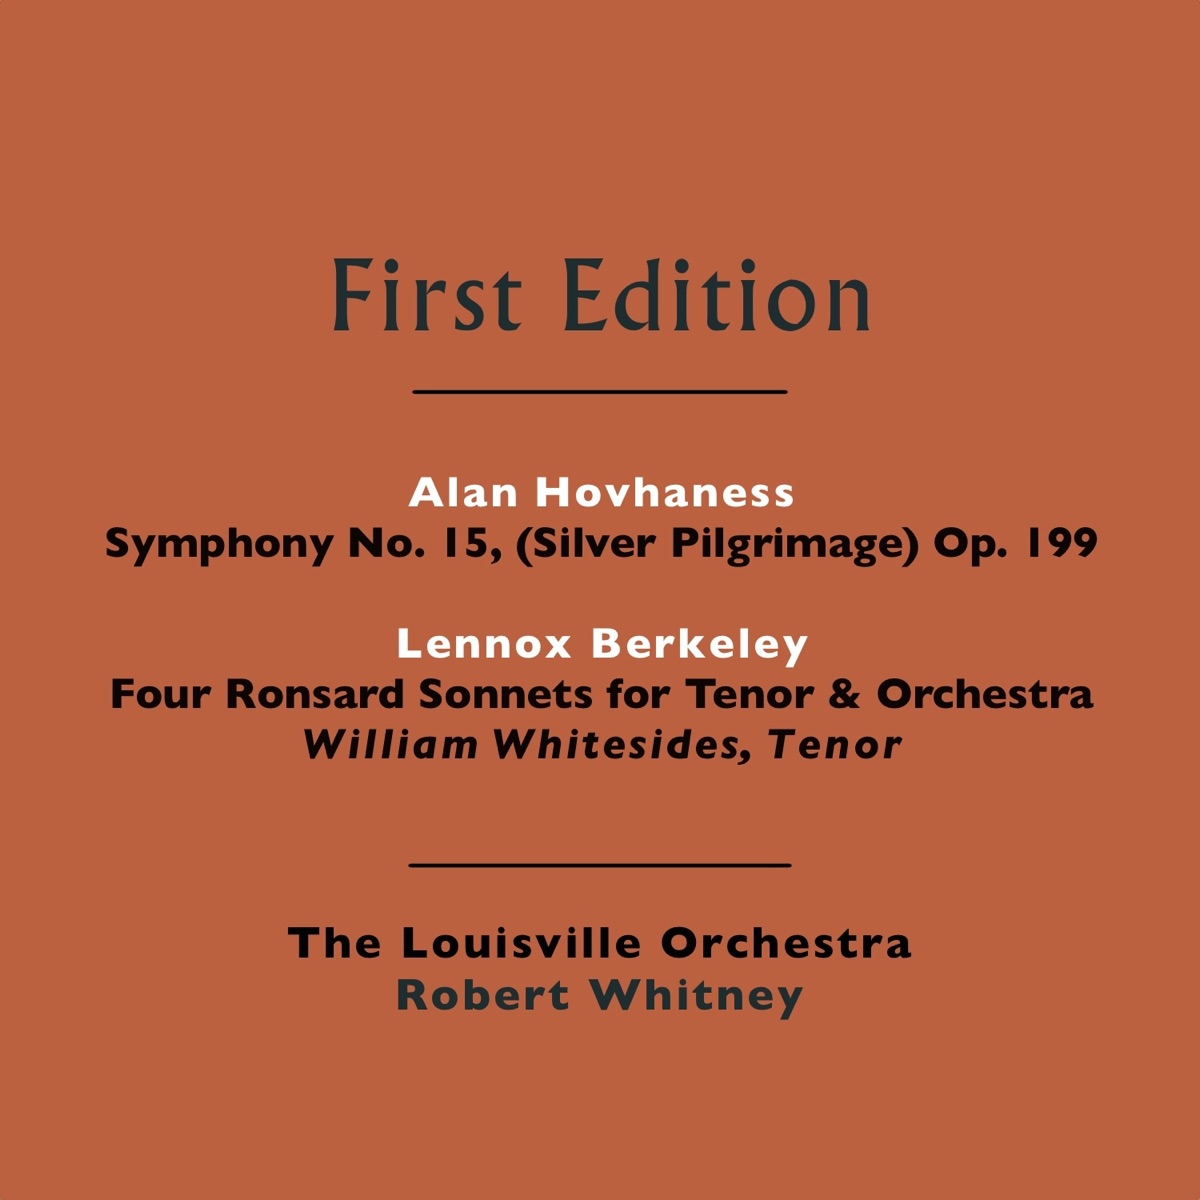 Alan Hovhaness: Symphony No. 15, (Silver Pilgrimage) Op. 199 - Lennox  Berkeley: Four Ronsard Sonnets for Tenor & Orchestra - Album by The  Louisville Orchestra & Robert Whitney - Apple Music